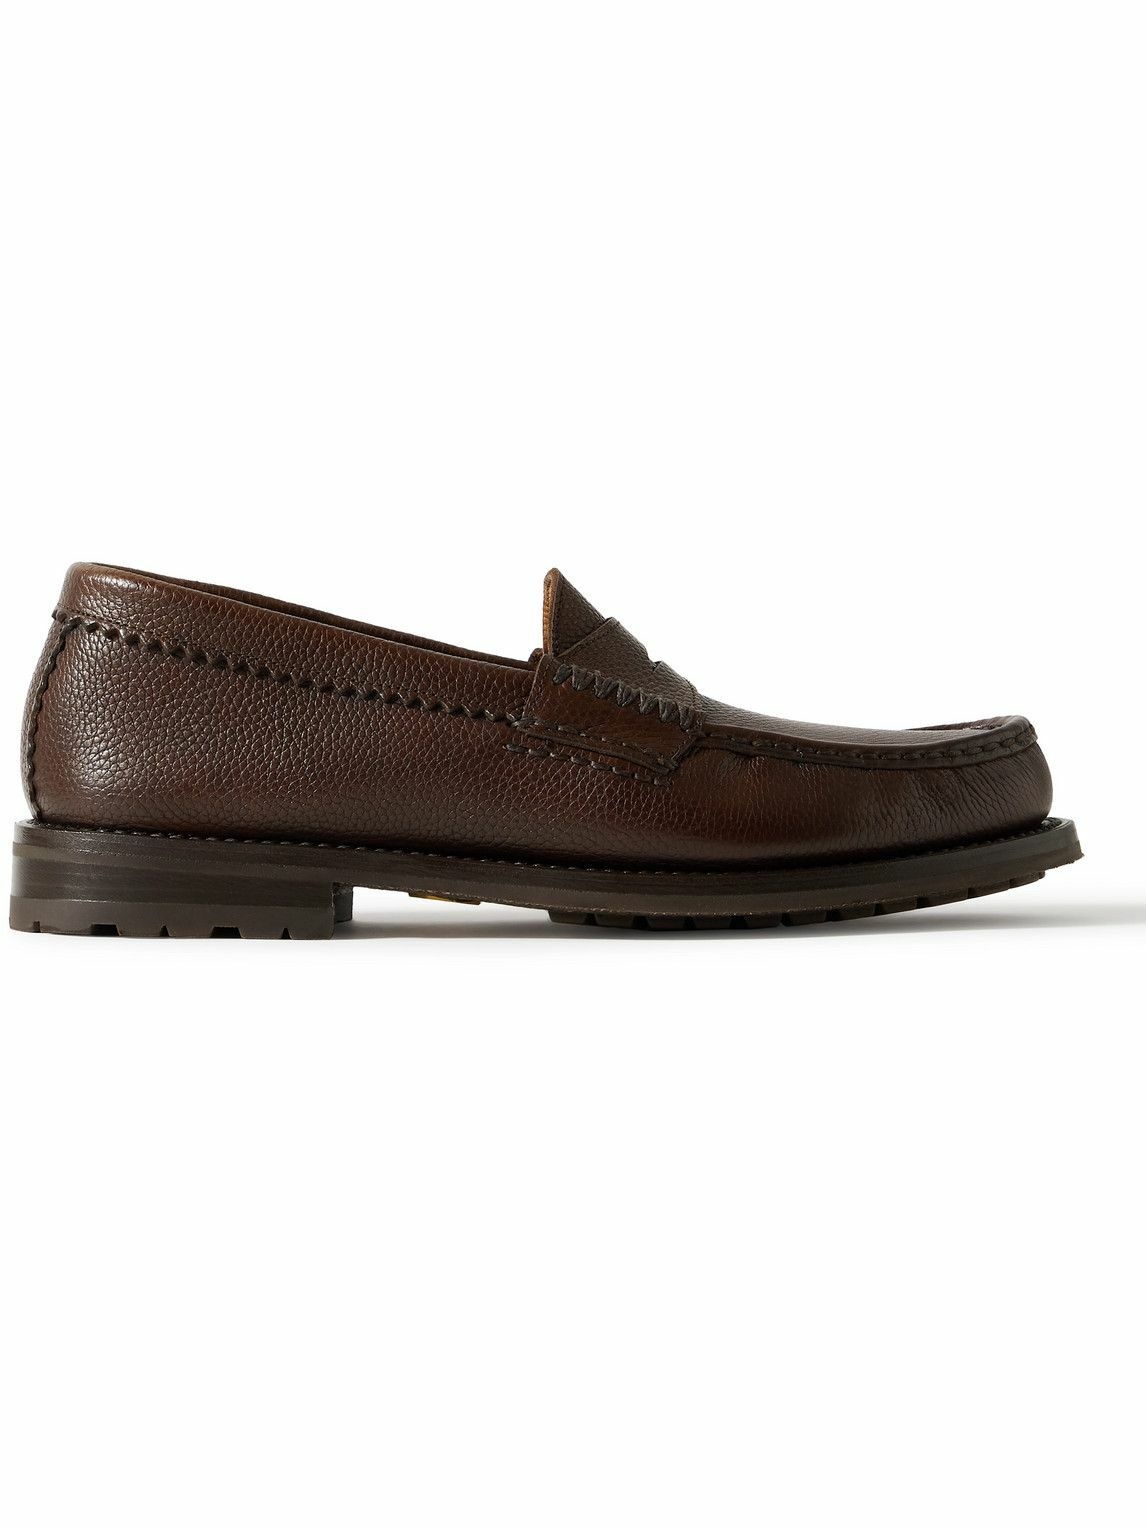 Photo: Yuketen - Rob's Full-Grain Leather Penny Loafers - Brown